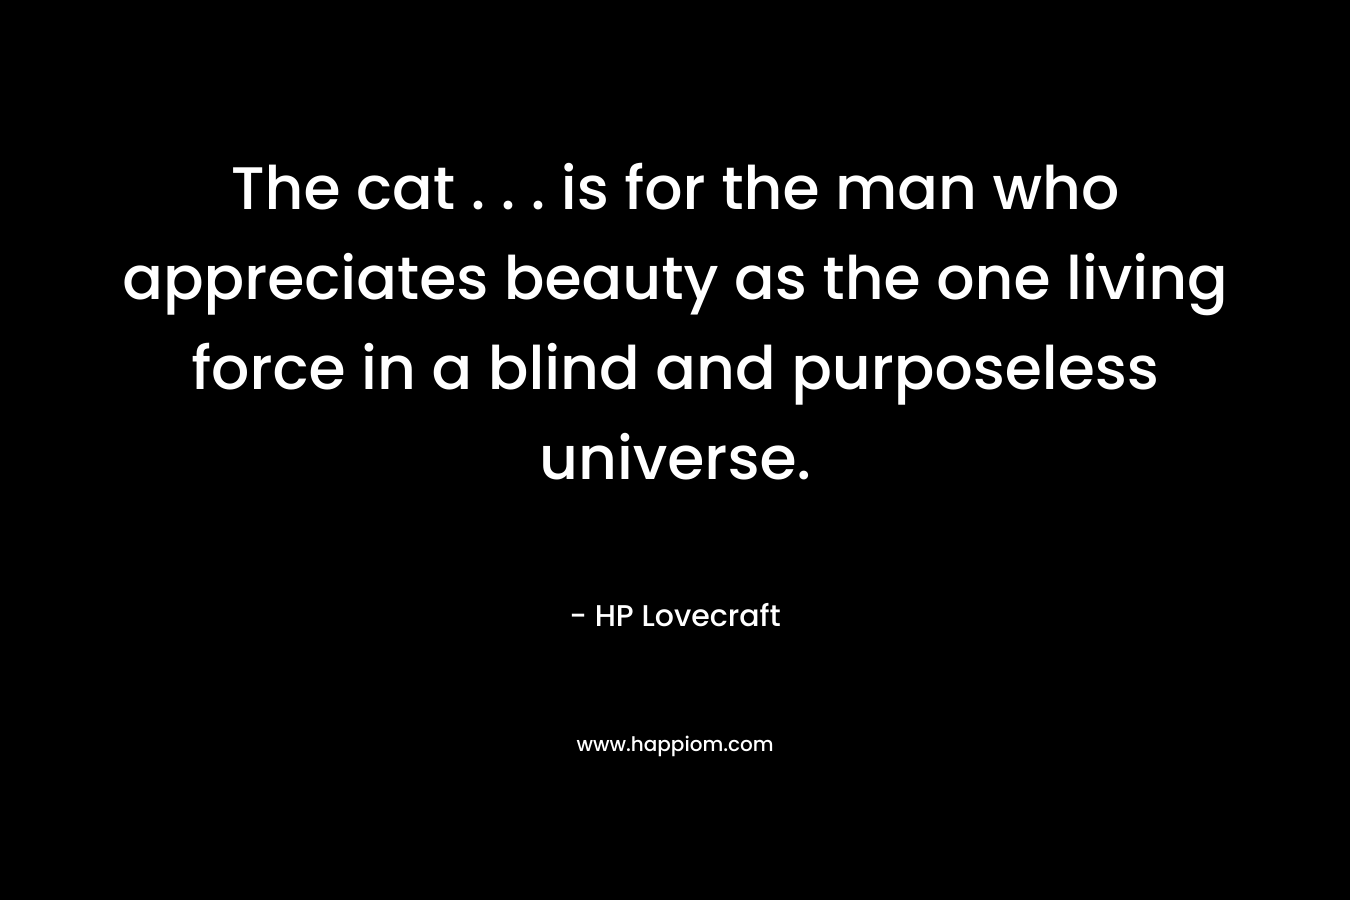 The cat . . . is for the man who appreciates beauty as the one living force in a blind and purposeless universe. – HP Lovecraft